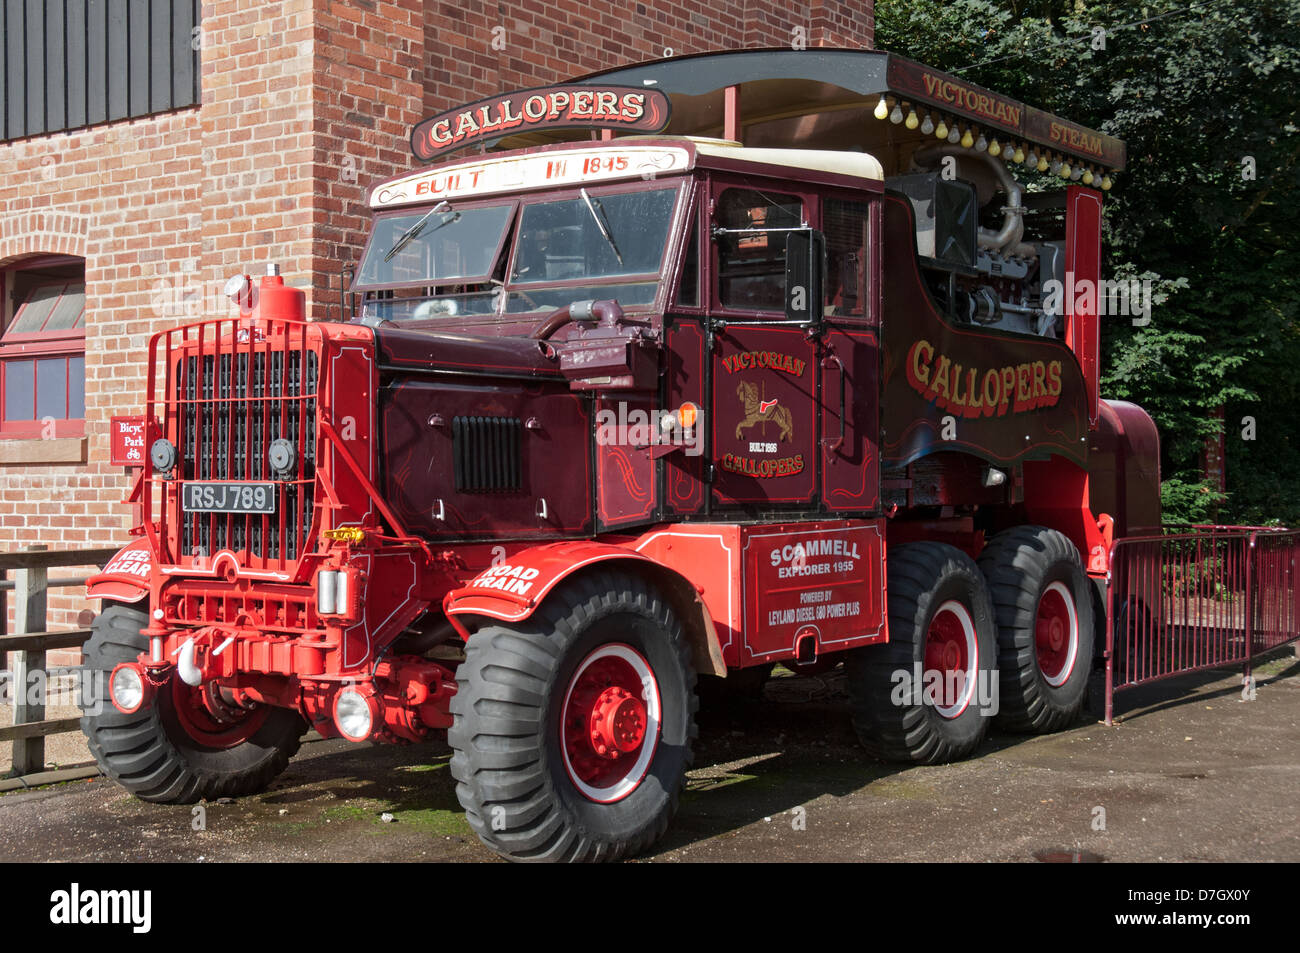 1955 Scammell truck housing a generator for a Victorian fairground ride, Tatton Park, Knutsford, Cheshire, England, UK Stock Photo